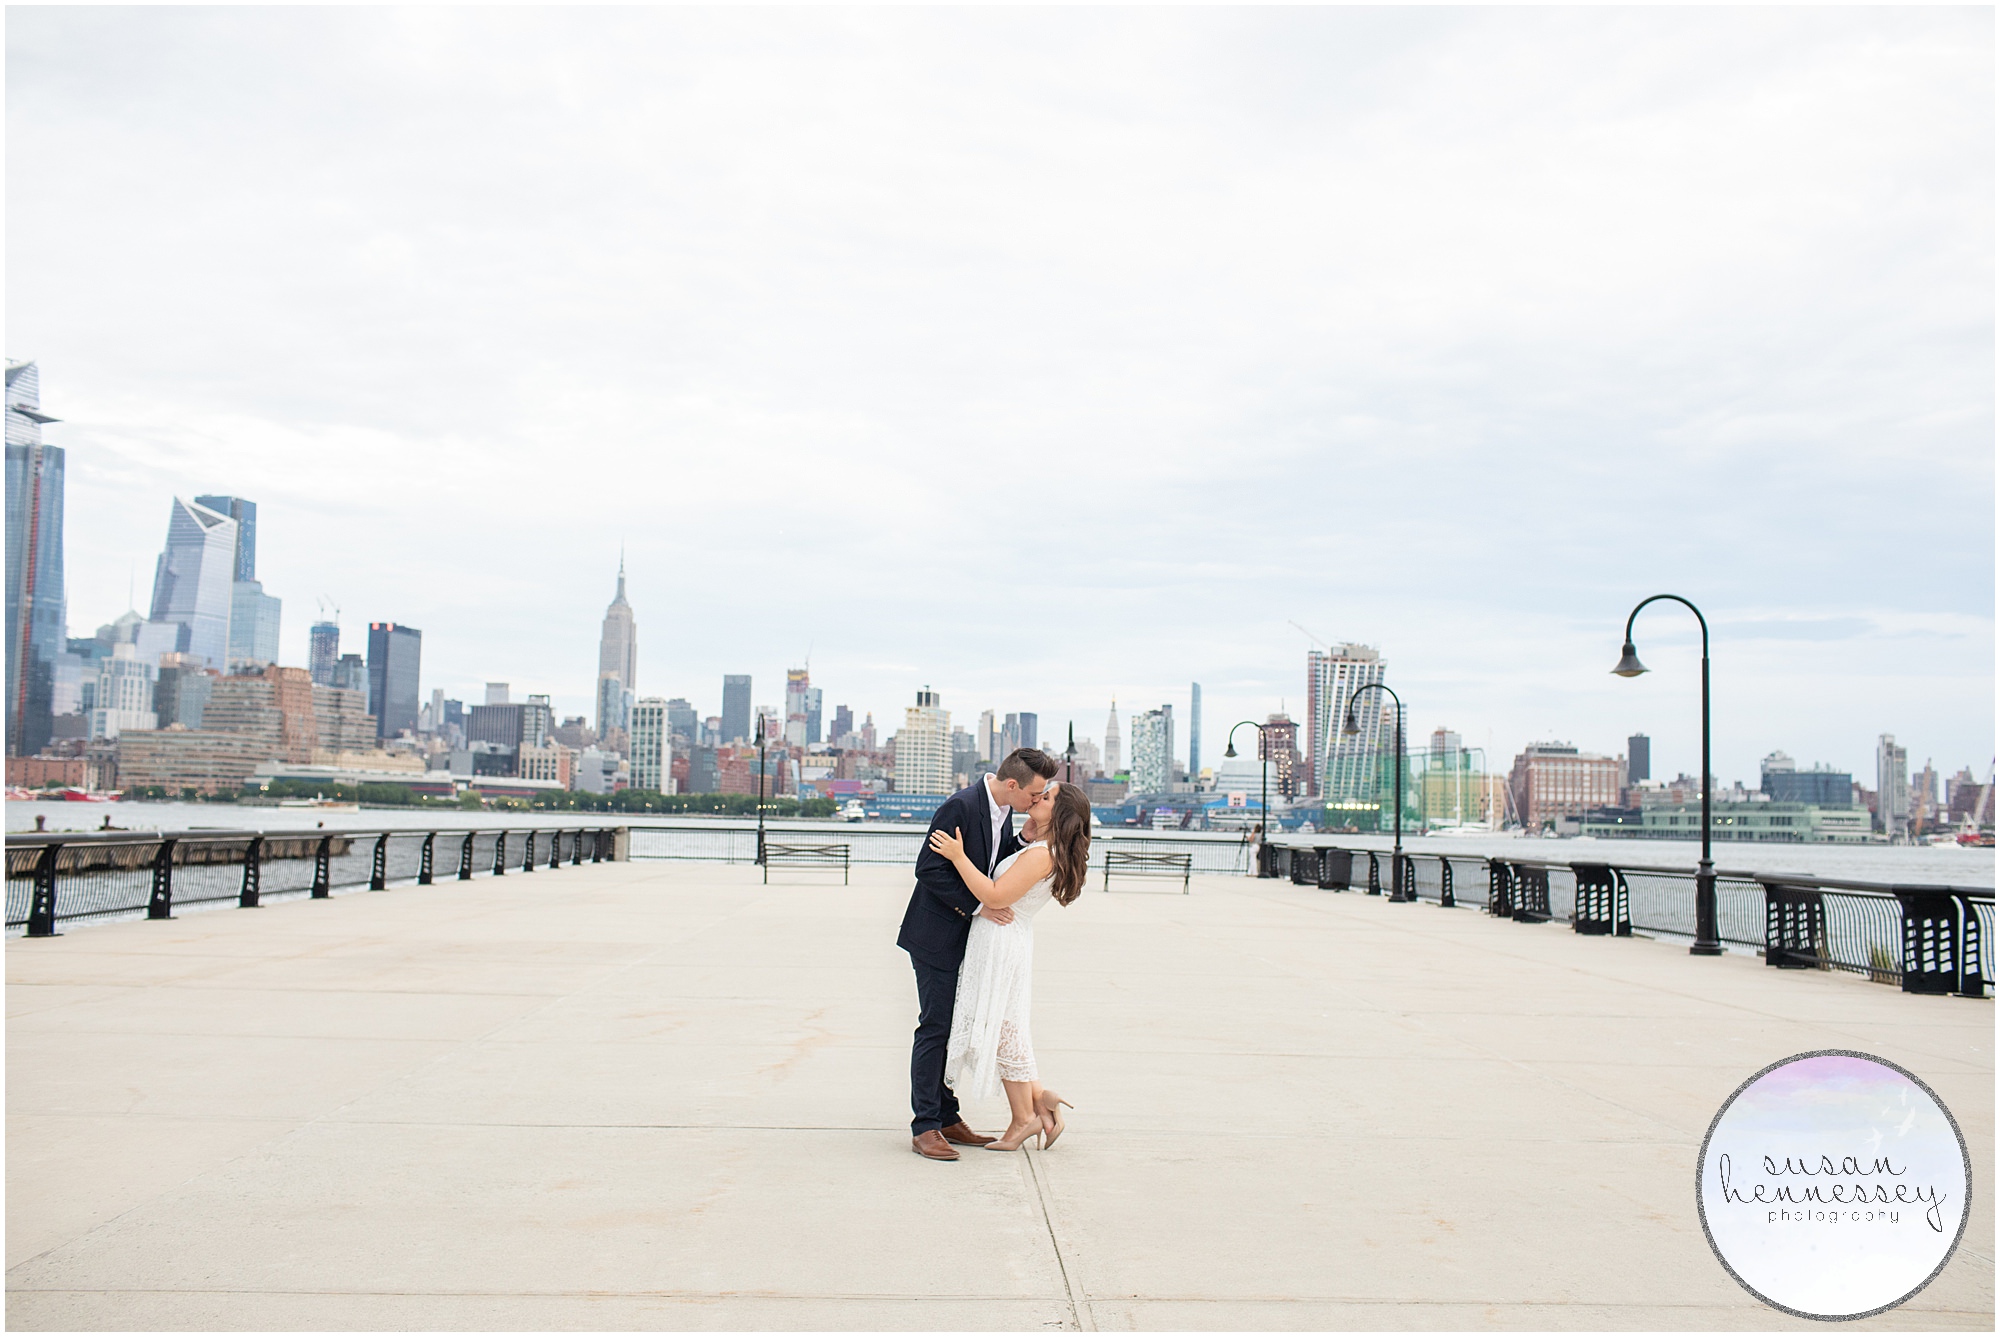 Hoboken Engagement Photos on the waterfront overlooking New York City